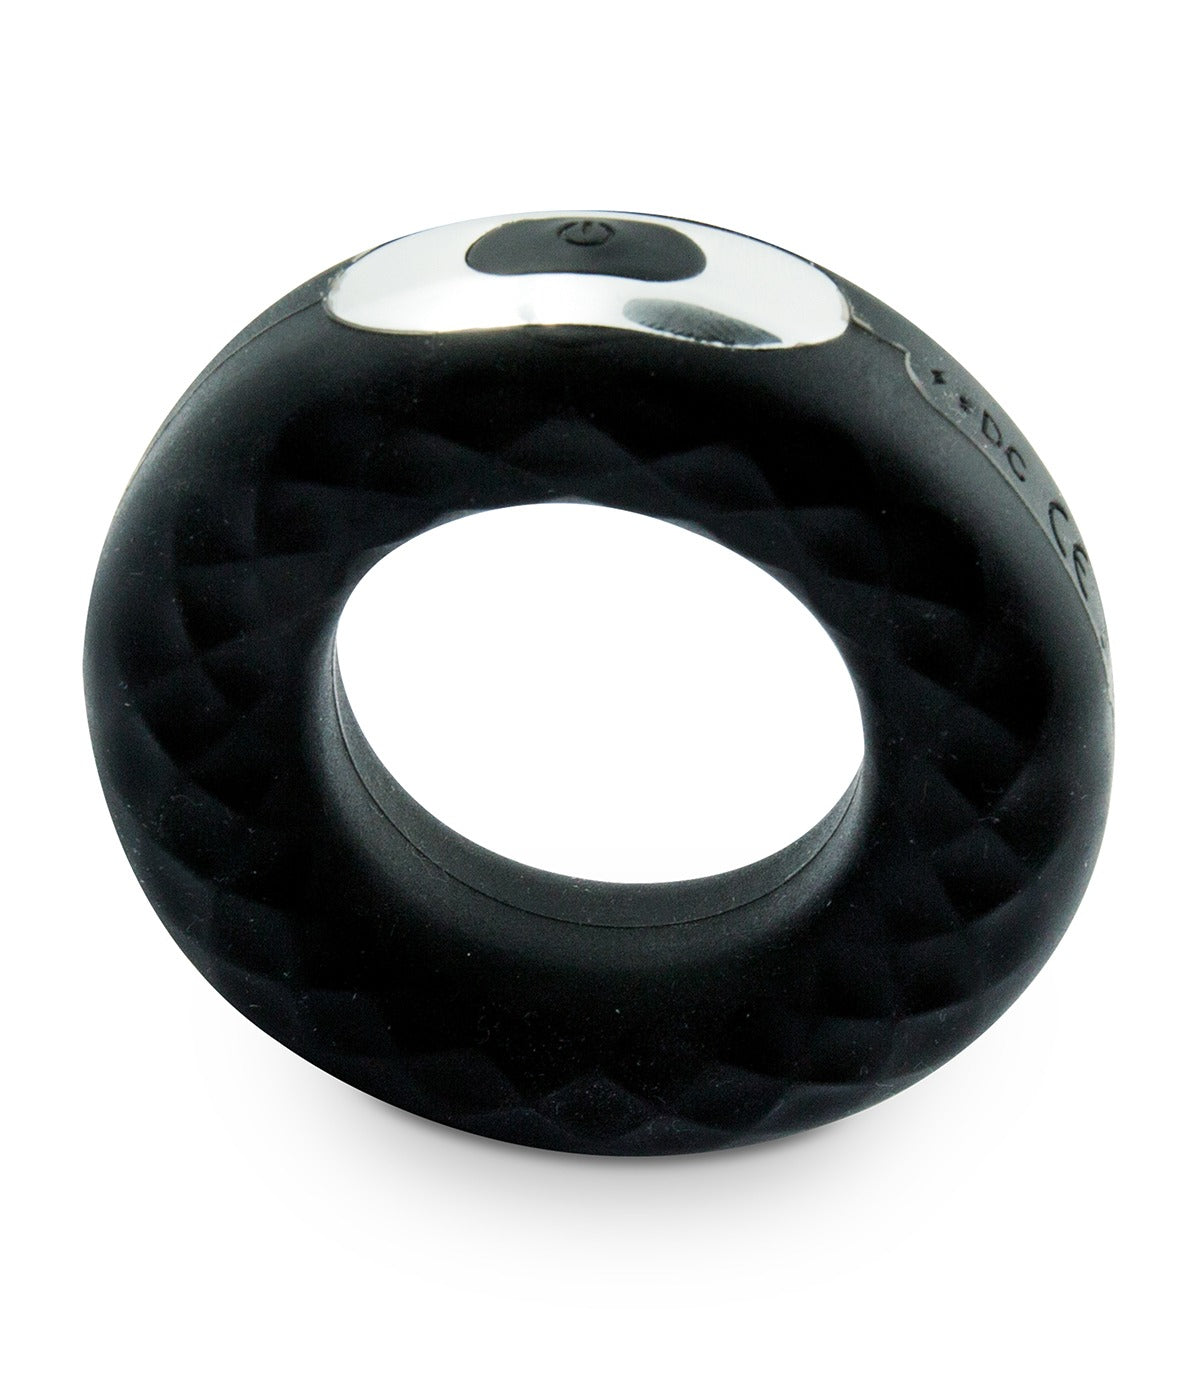 MVW Mr. Cock Luxury Line Rechargeable Vibrating Cockring - Black